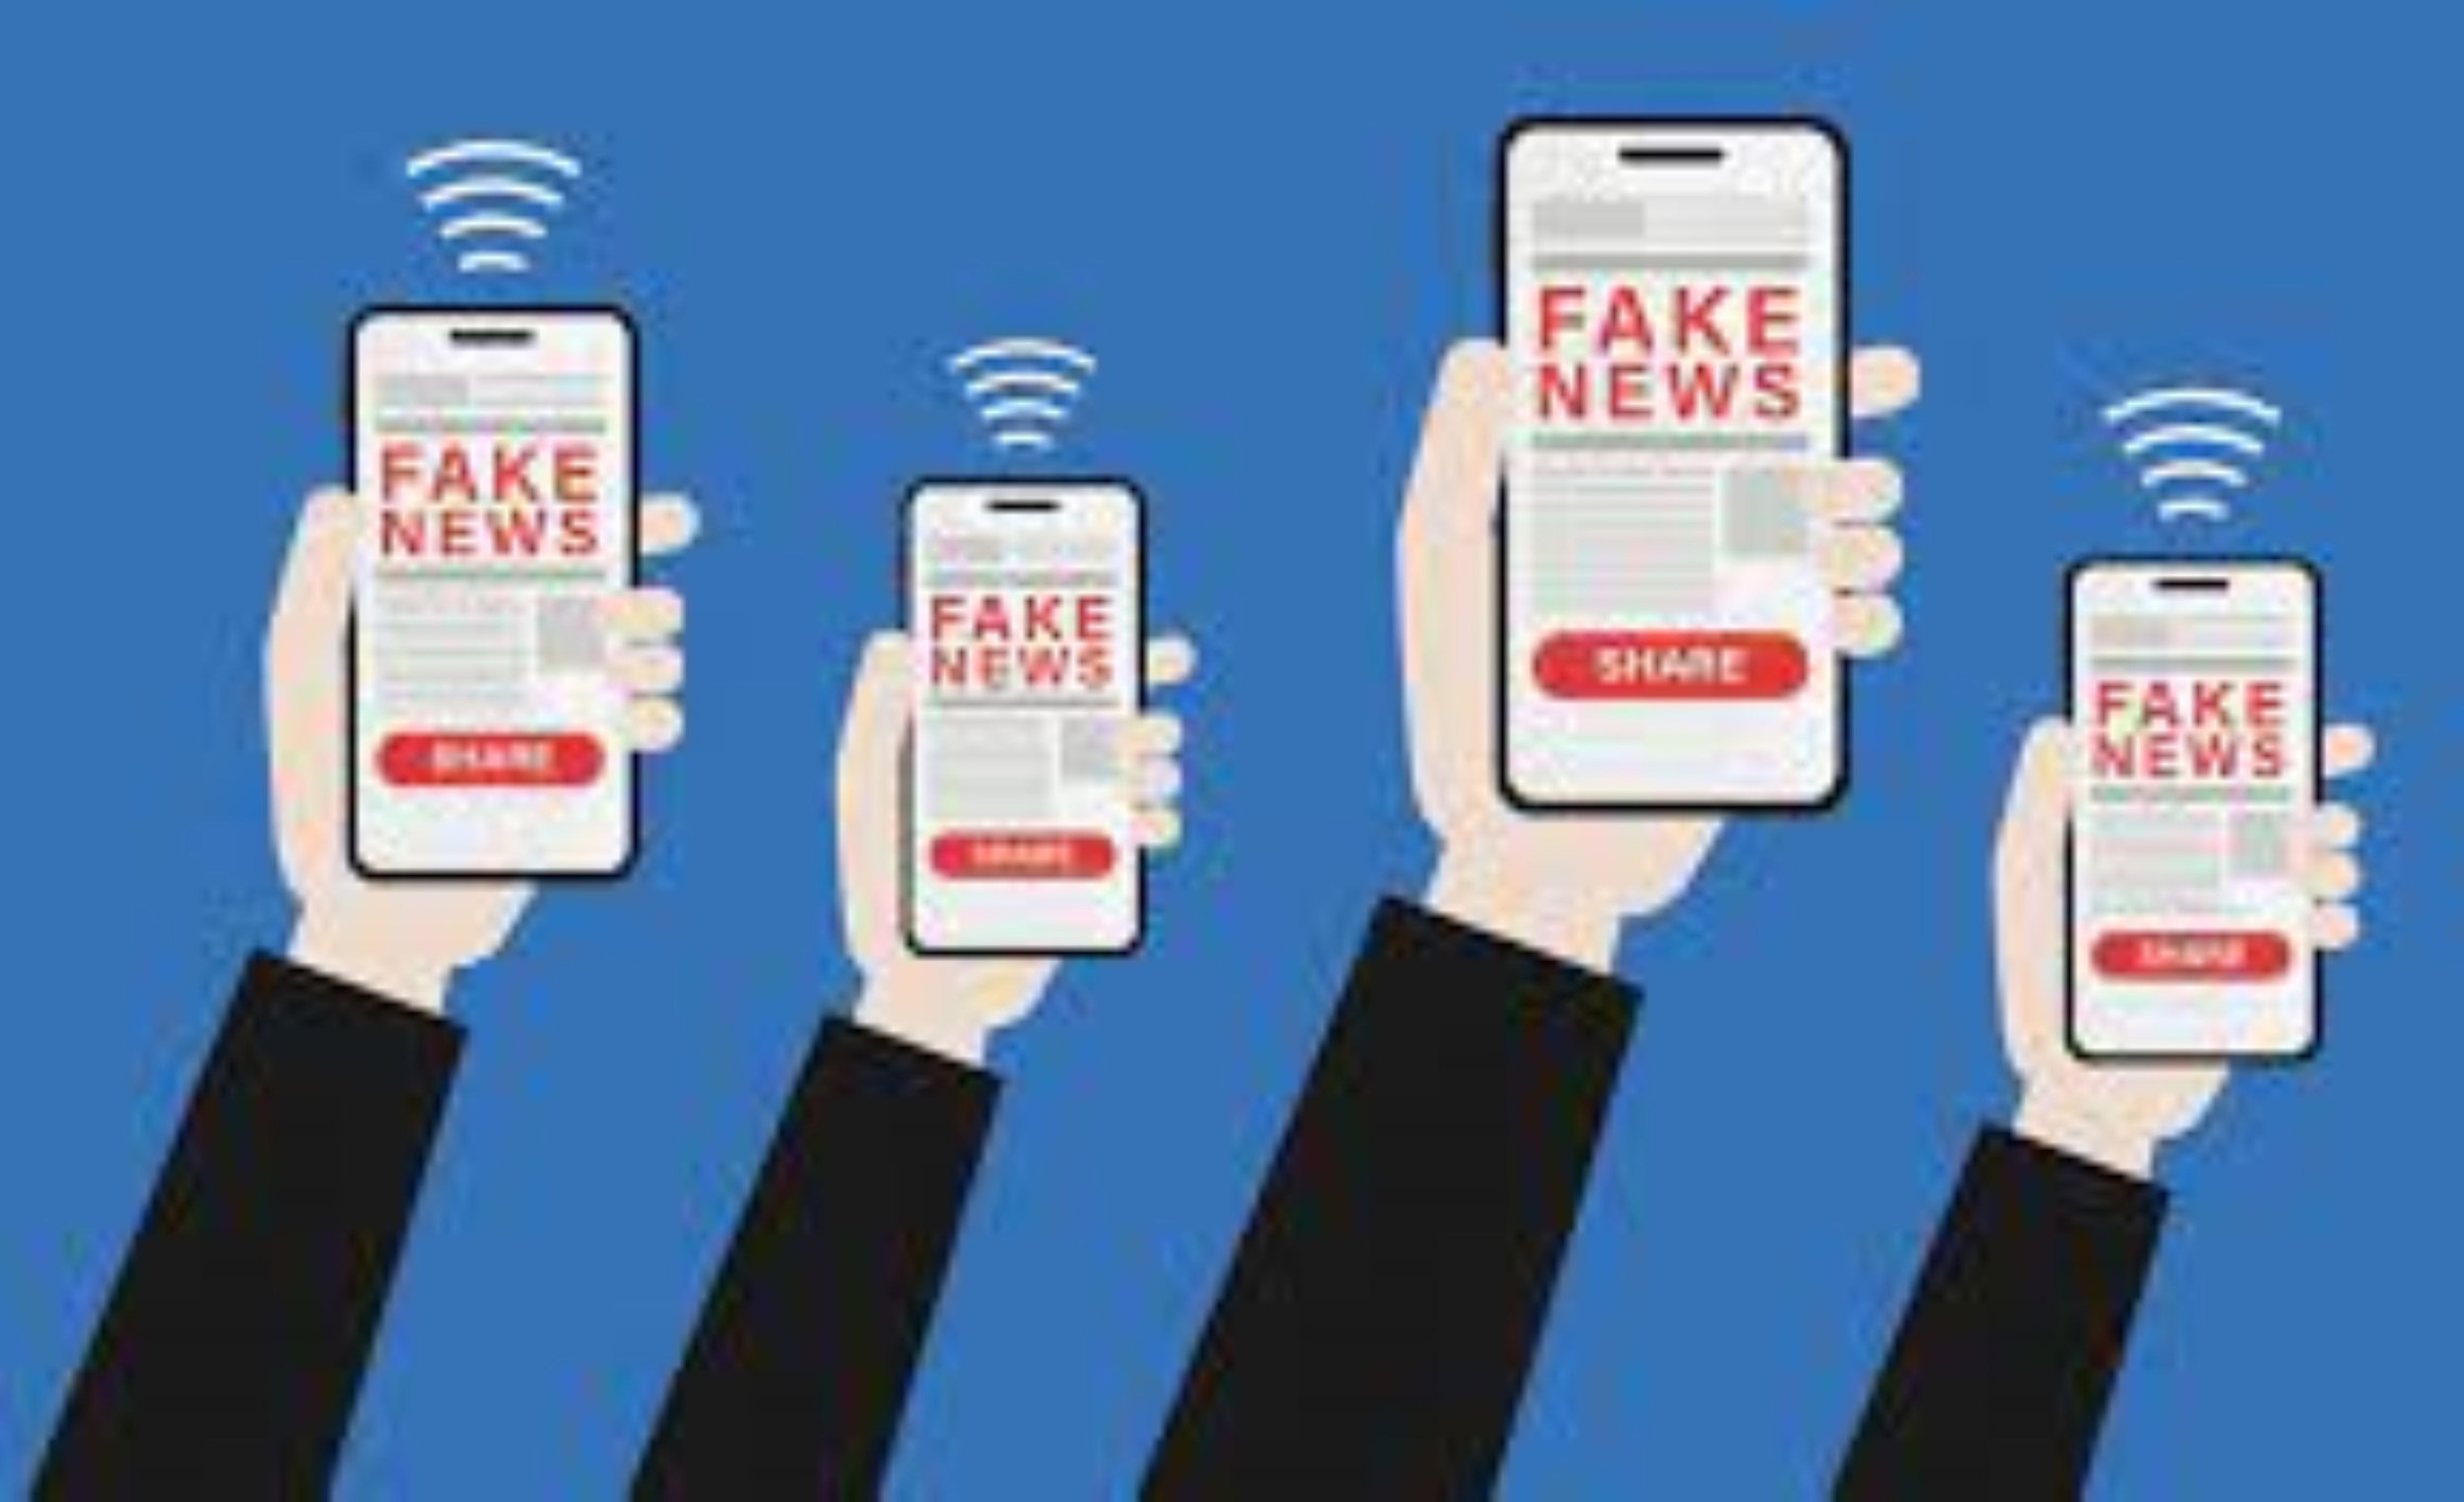 Factcheck Africa’s Al gadget detects fake news instantly